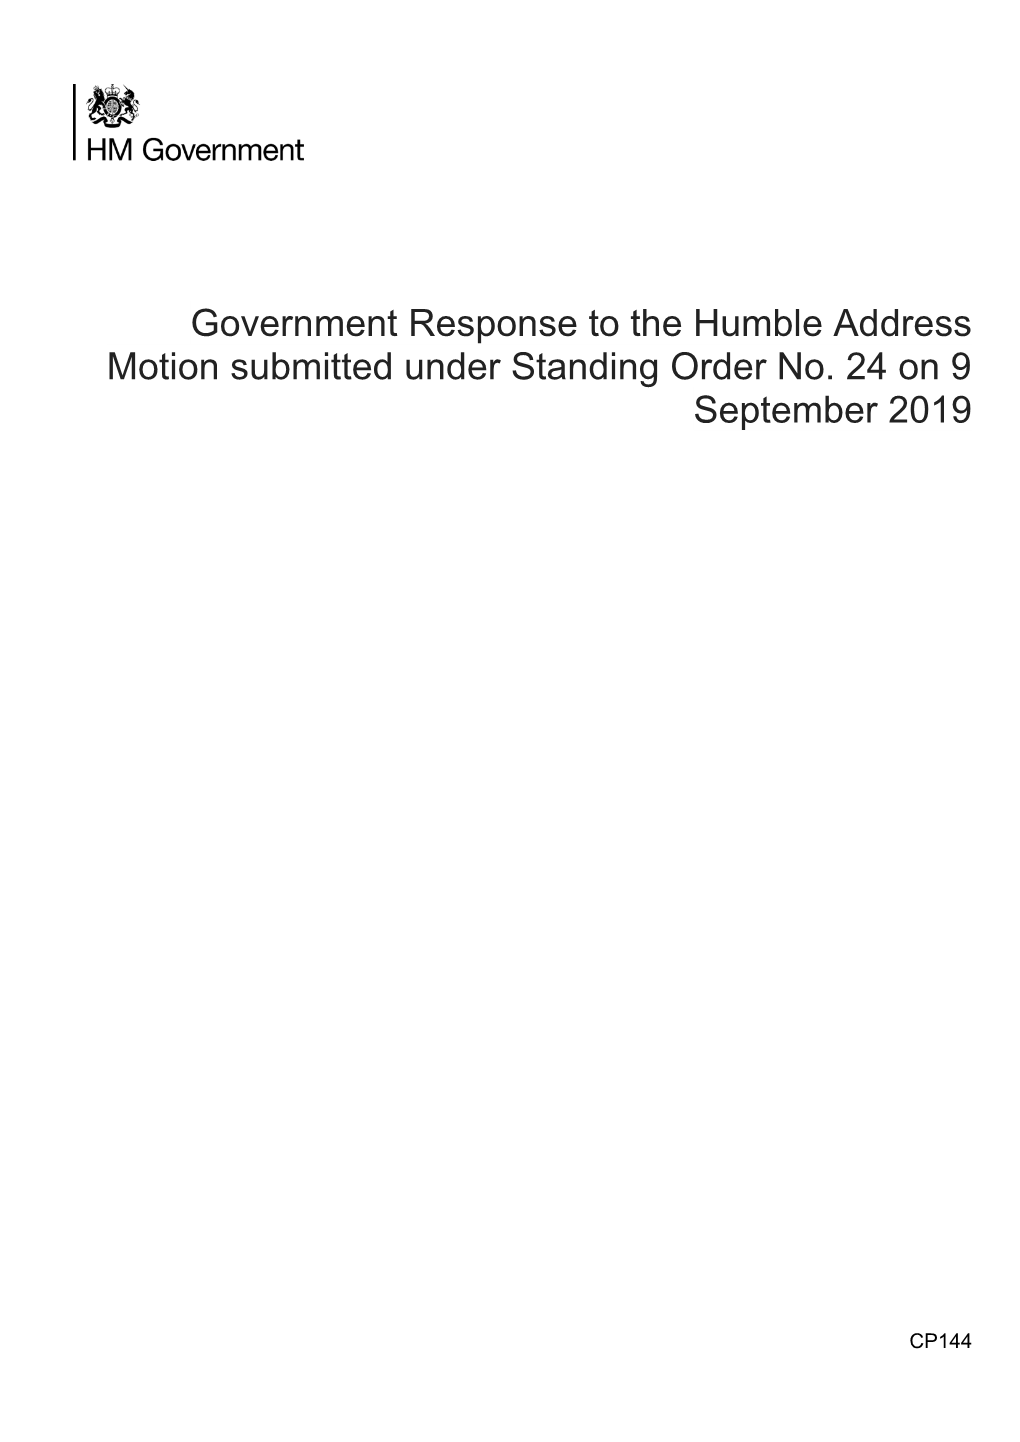 Government Response to the Humble Address Motion Submitted Under Standing Order No. 24 on 9 September 2019